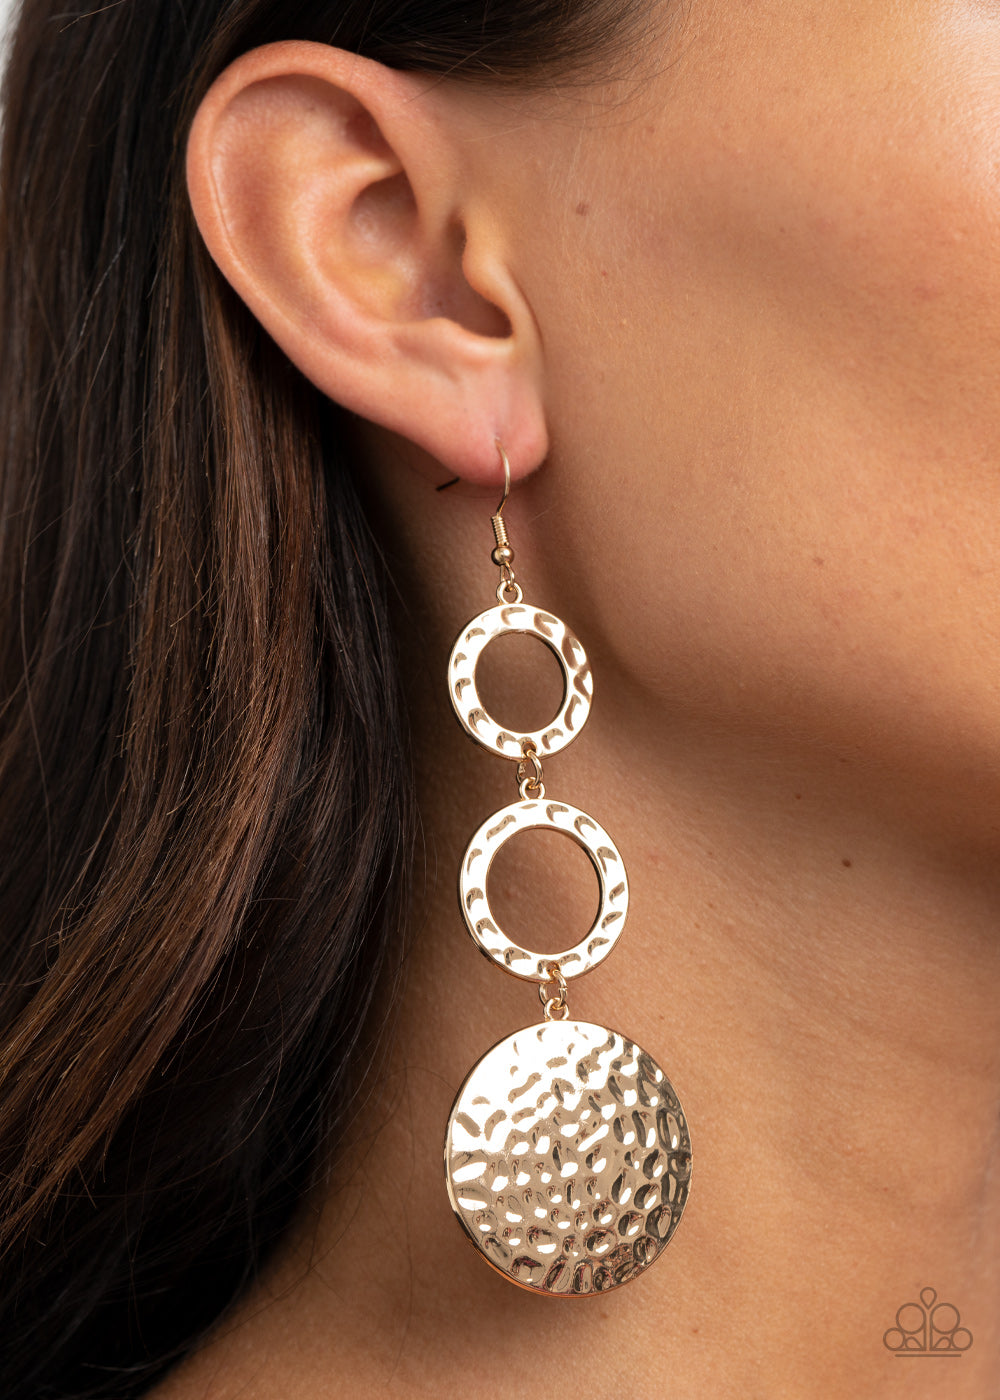 Blooming Baubles Earrings - Gold Paparazzi